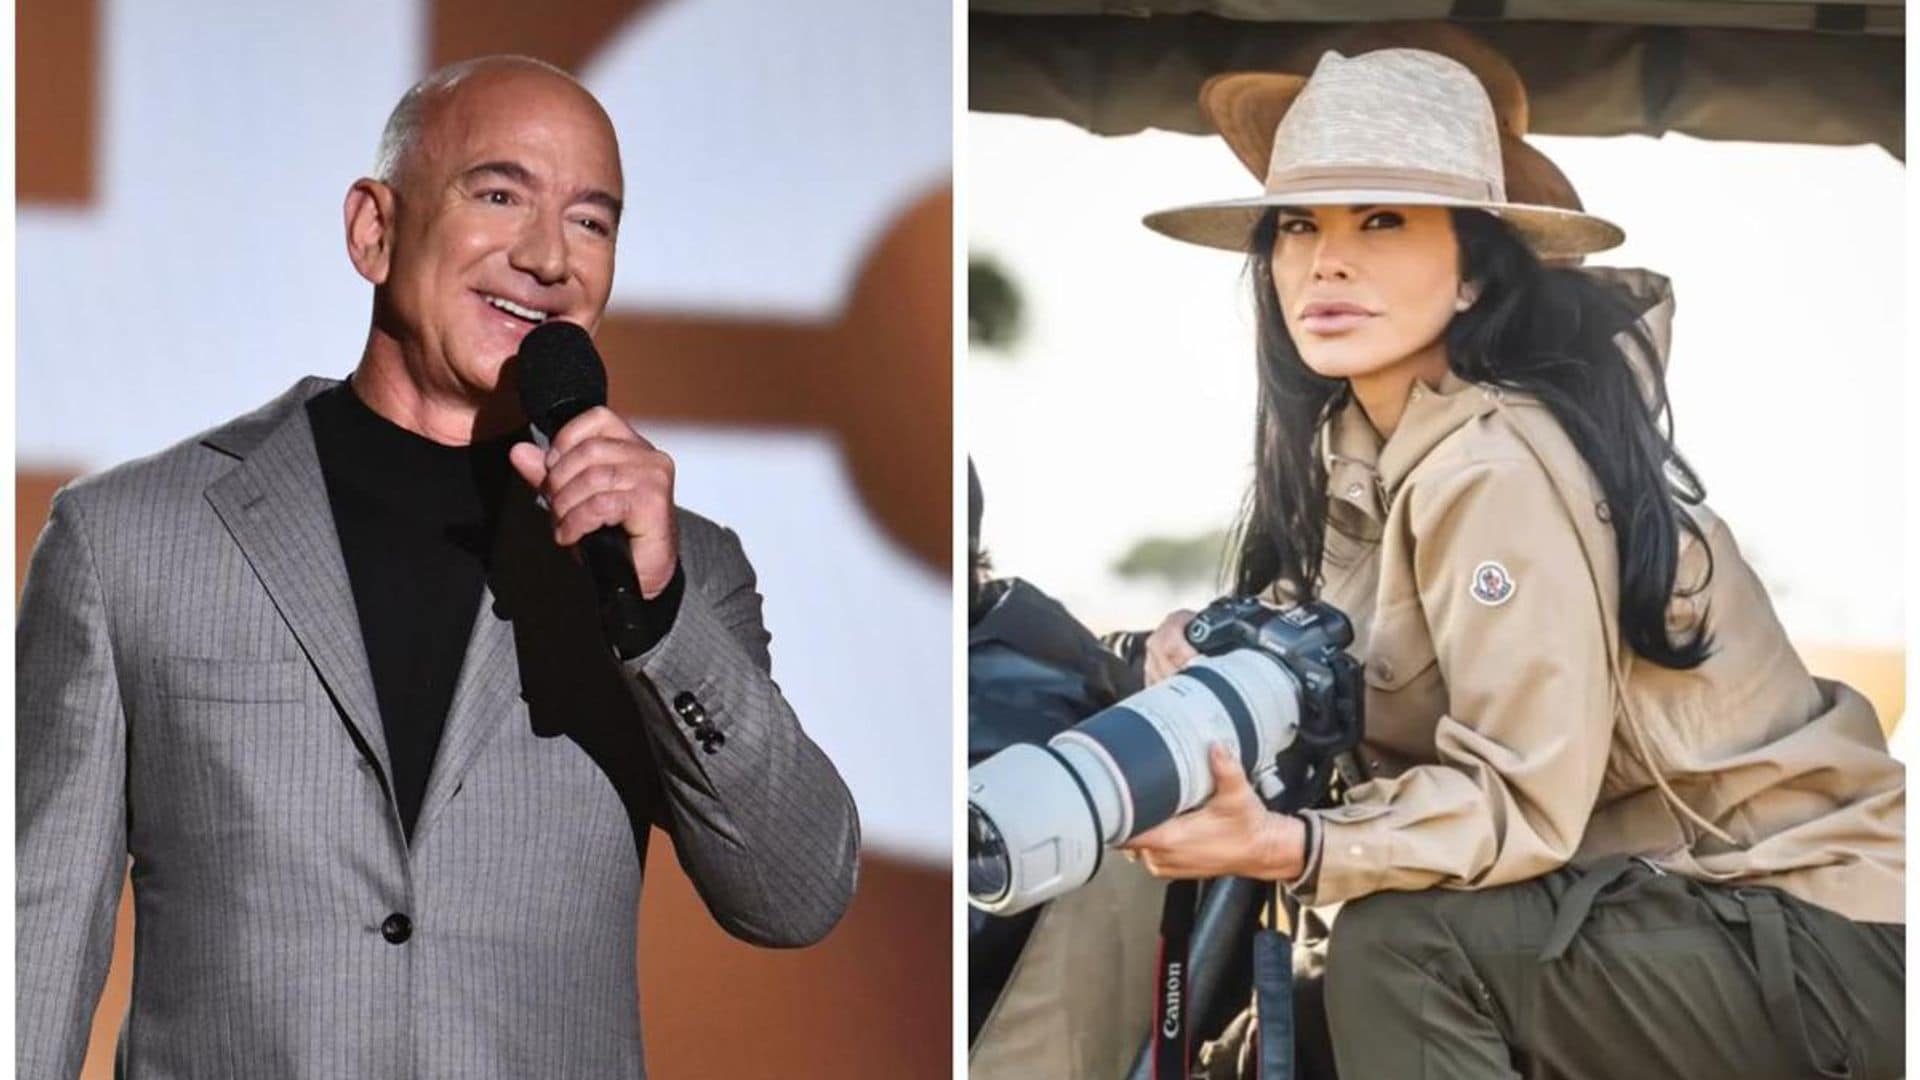 Jeff Bezos and Lauren Sanchez are committed to restoring Africa’s landscape through the Bezos Earth Fund